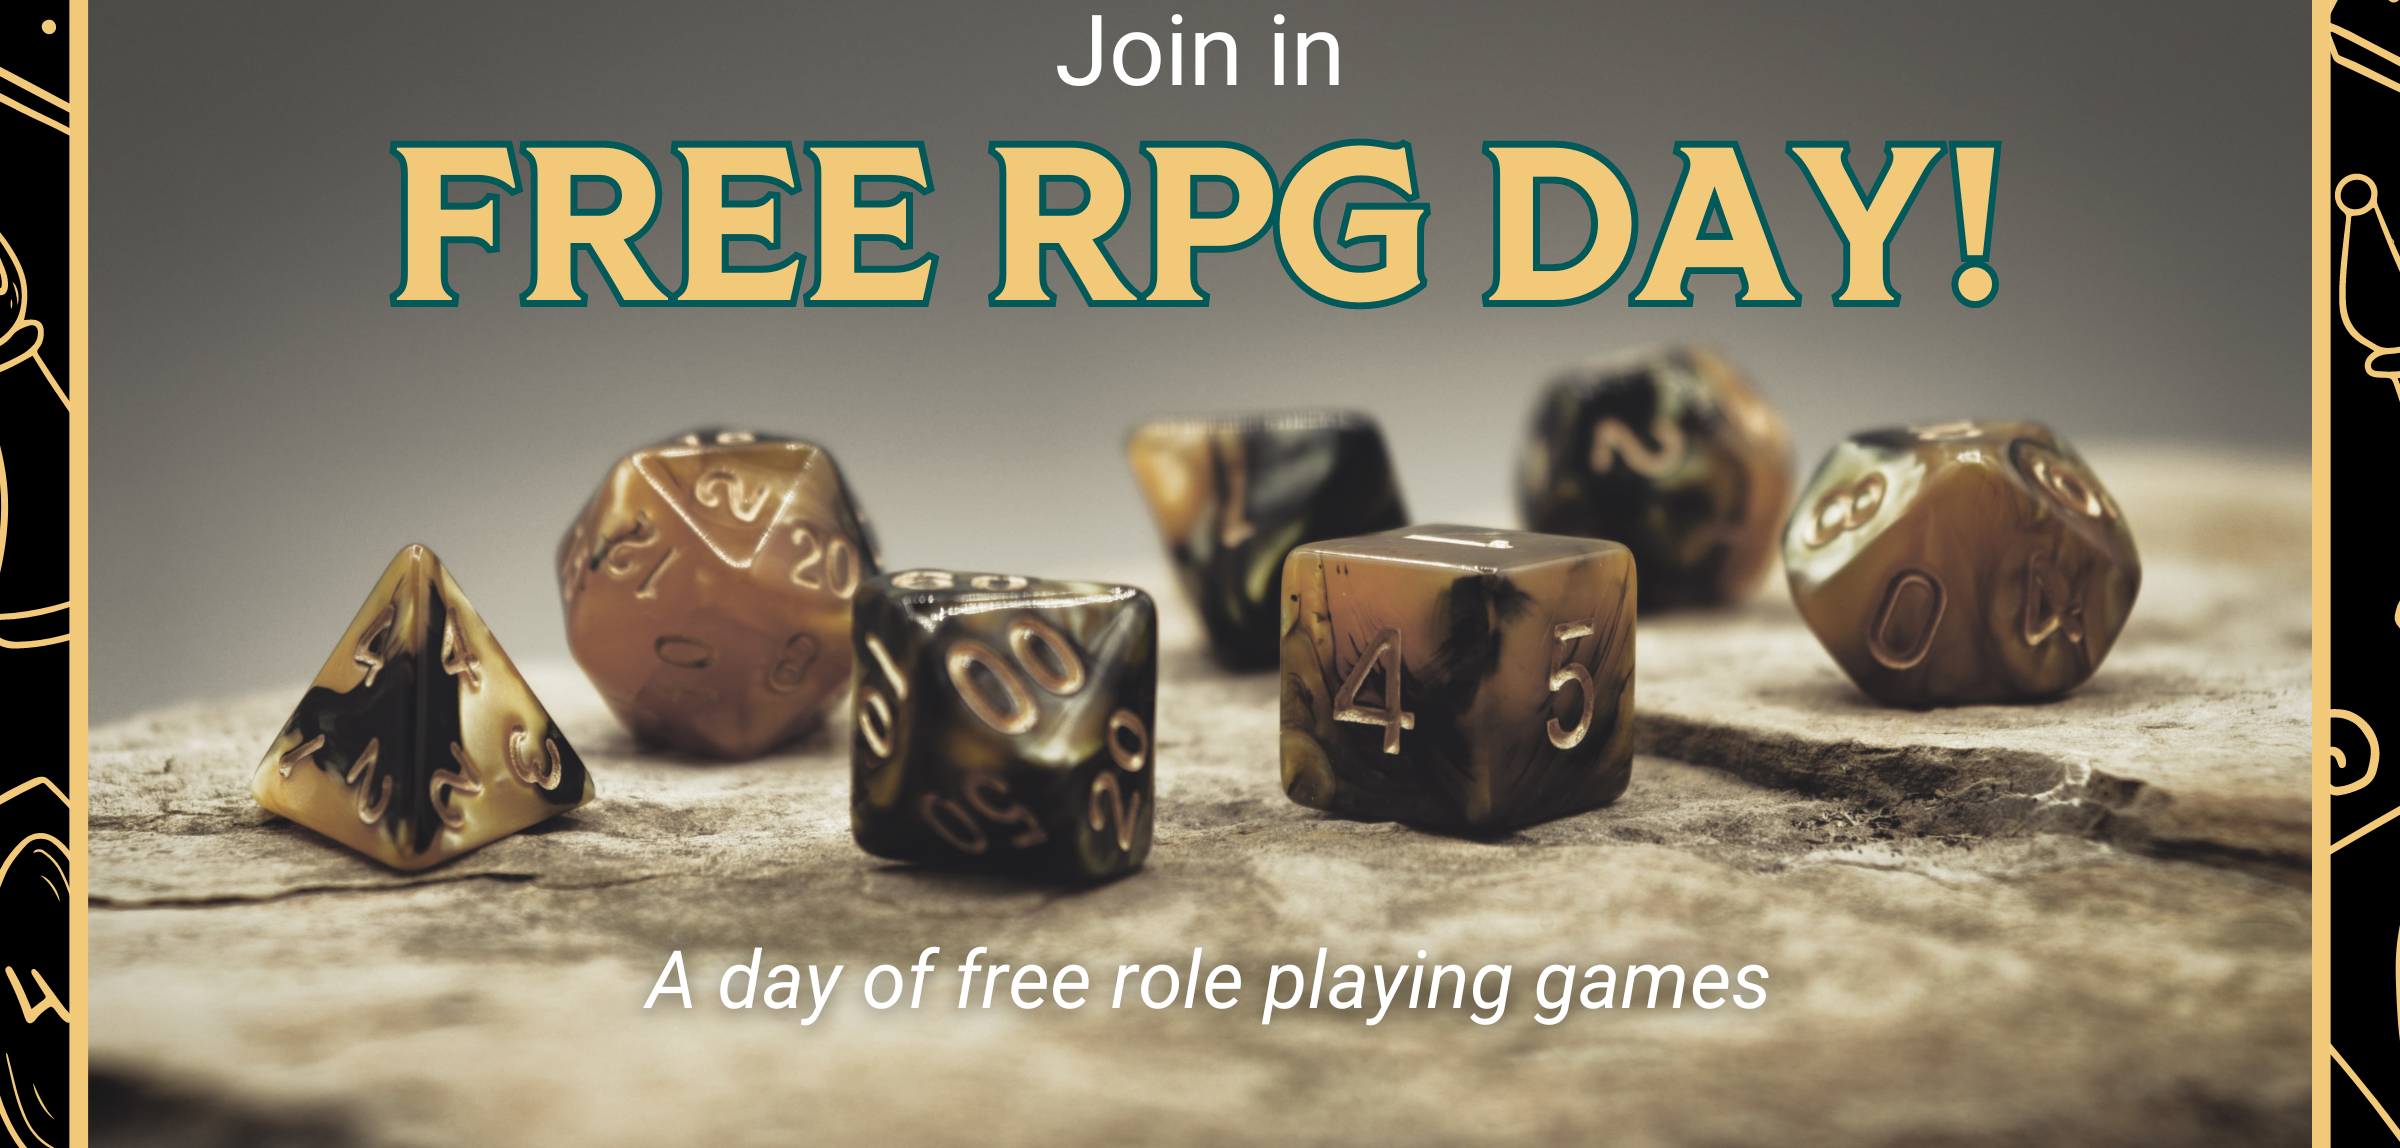 Free RPG (Role Playing Game) Day!